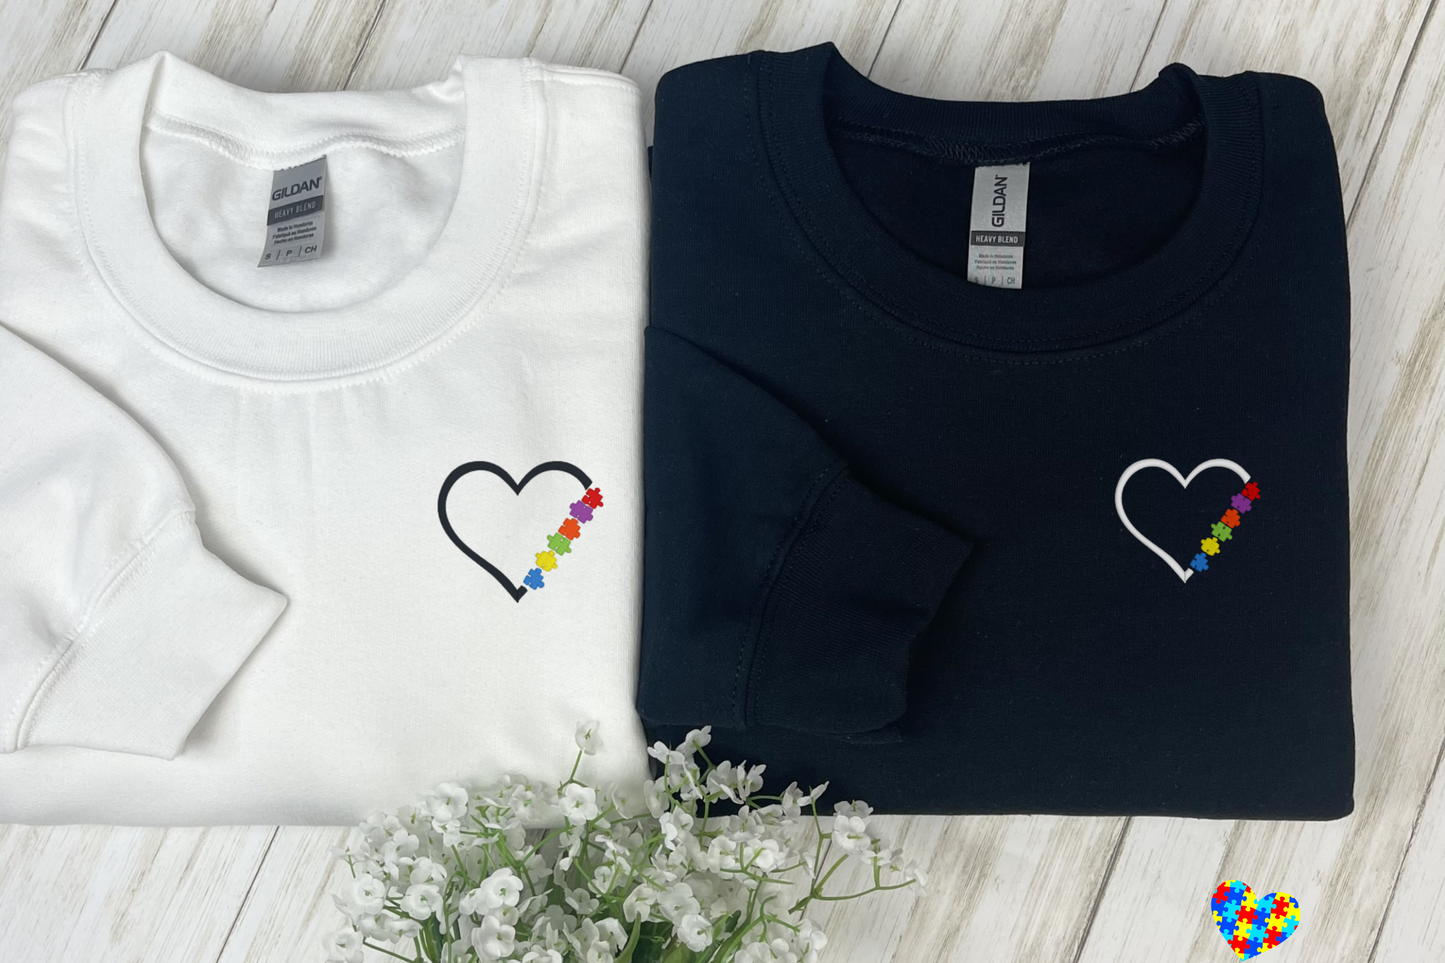 Autism Awareness Sweater: Show Your Support with a Heart-Shaped Design, Embroidered heart shaped,